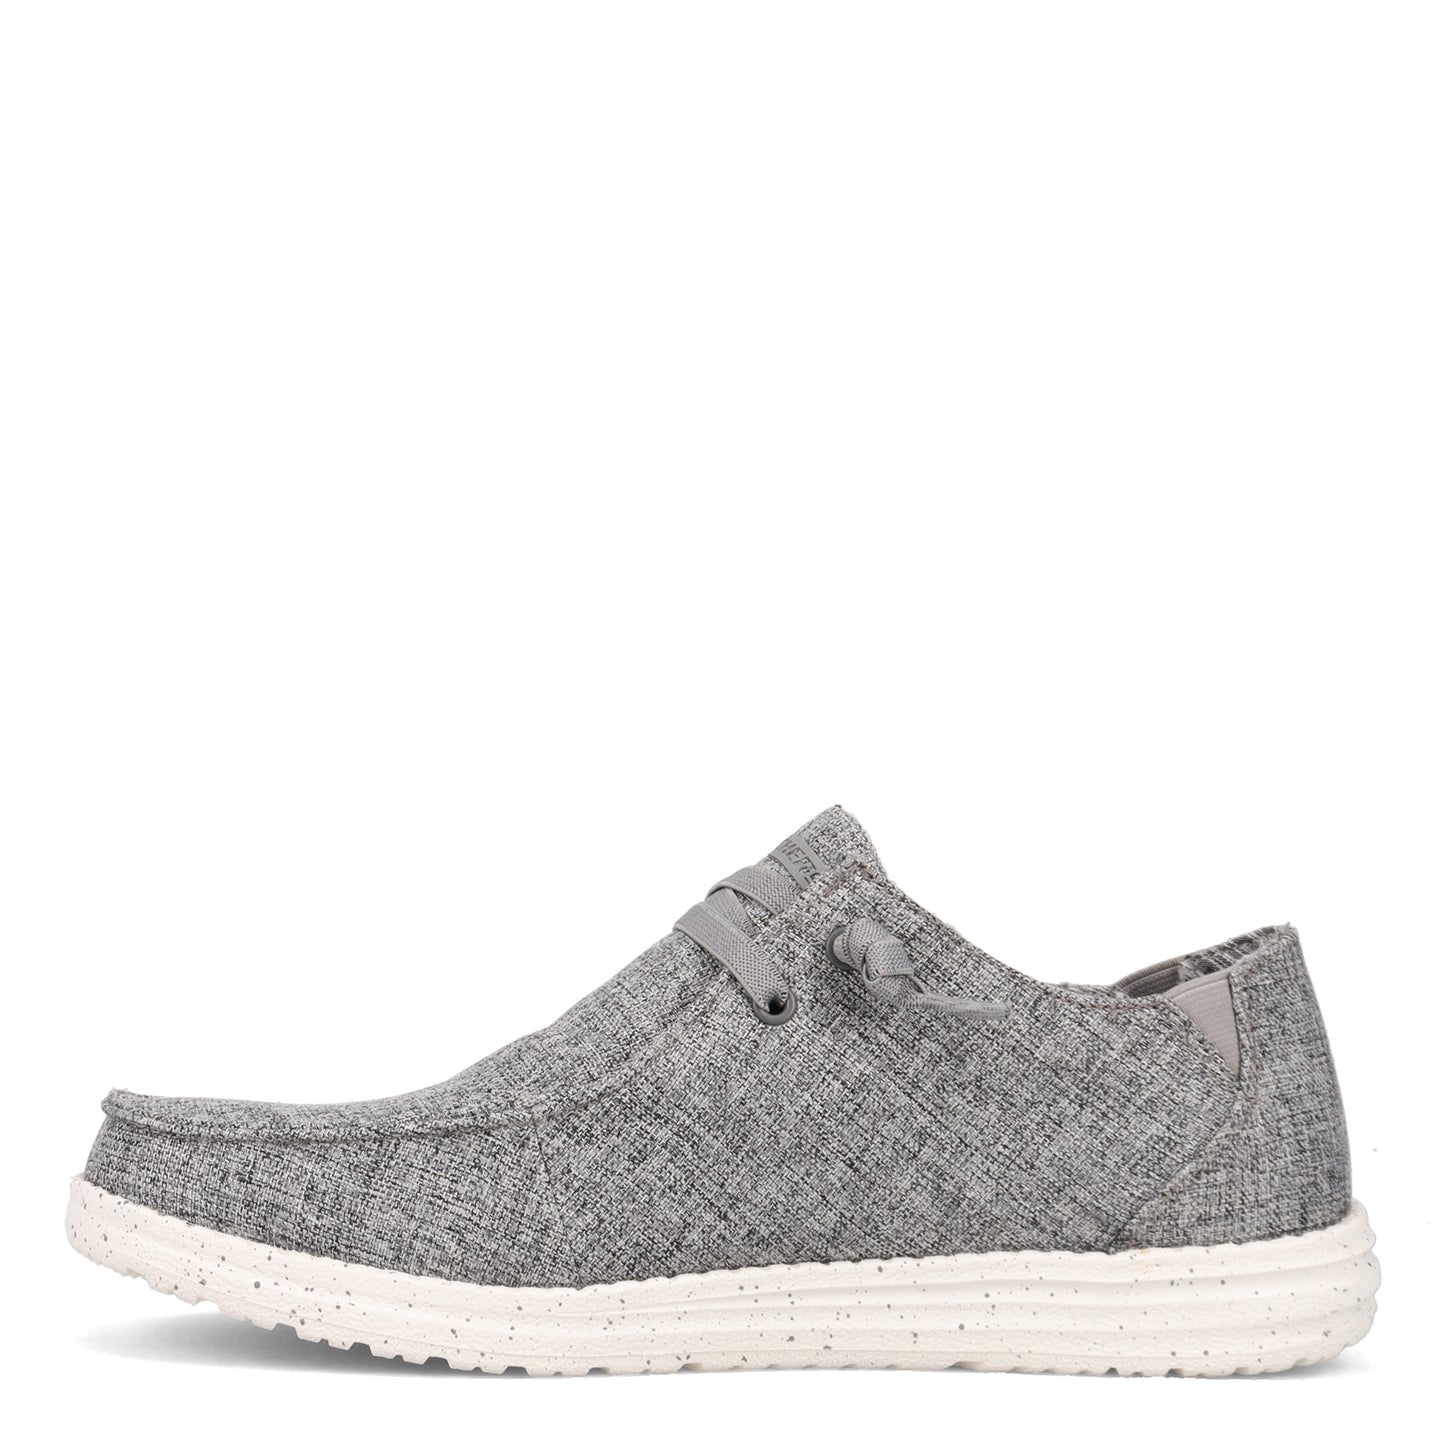 Peltz Shoes  Men's Skechers Relaxed Fit: Melson - Chad Slip-On GRAY 210101-GRY